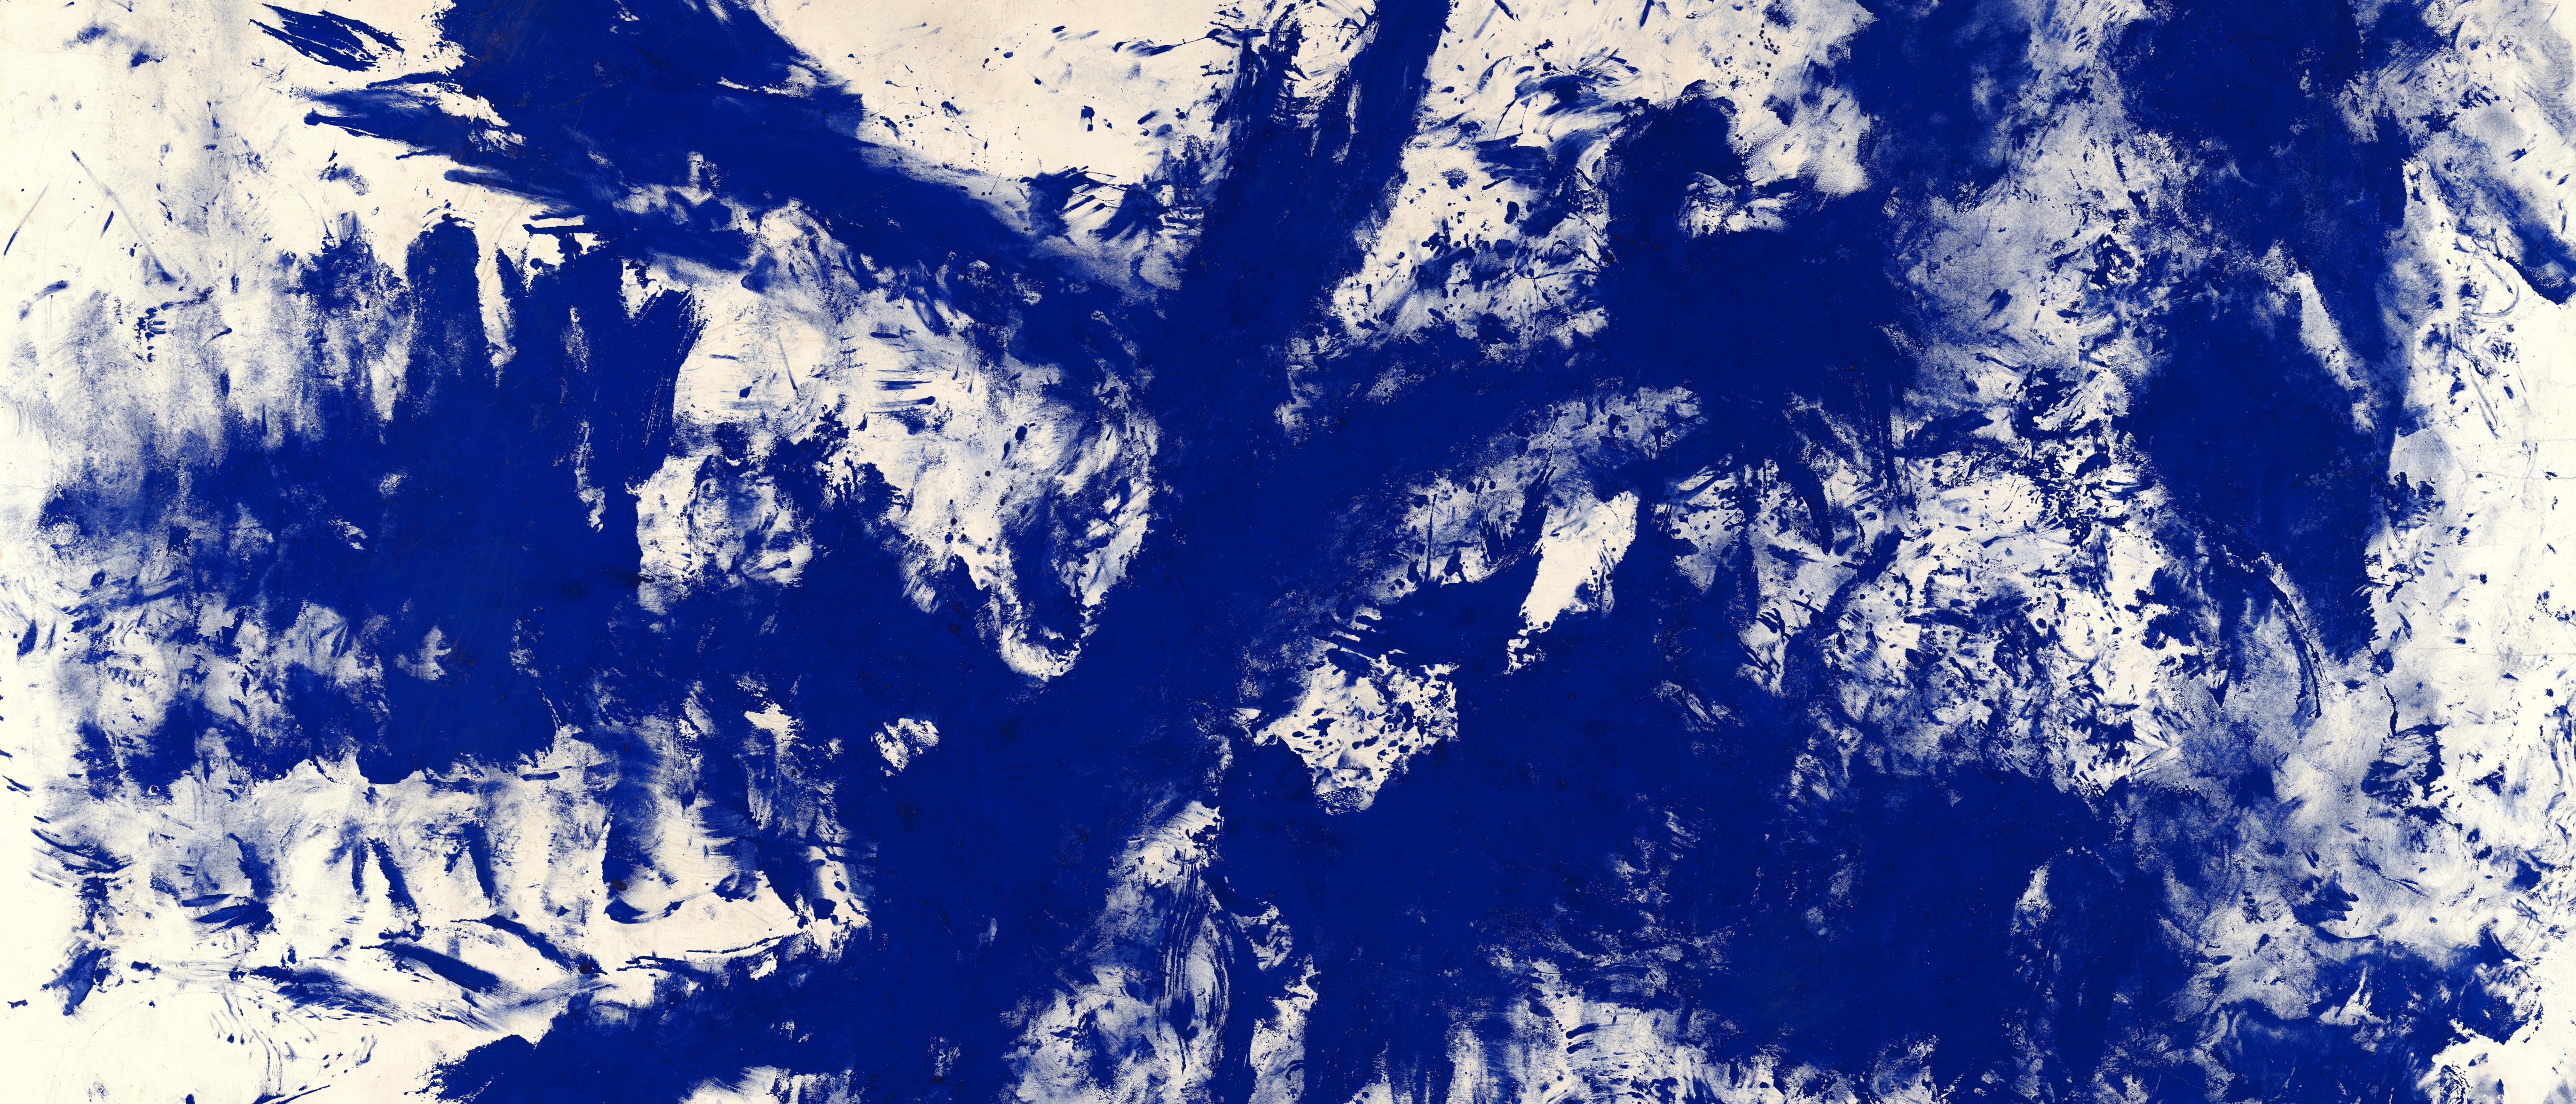 Ultrawide Painting Abstract Rorschach Test 5479x2348